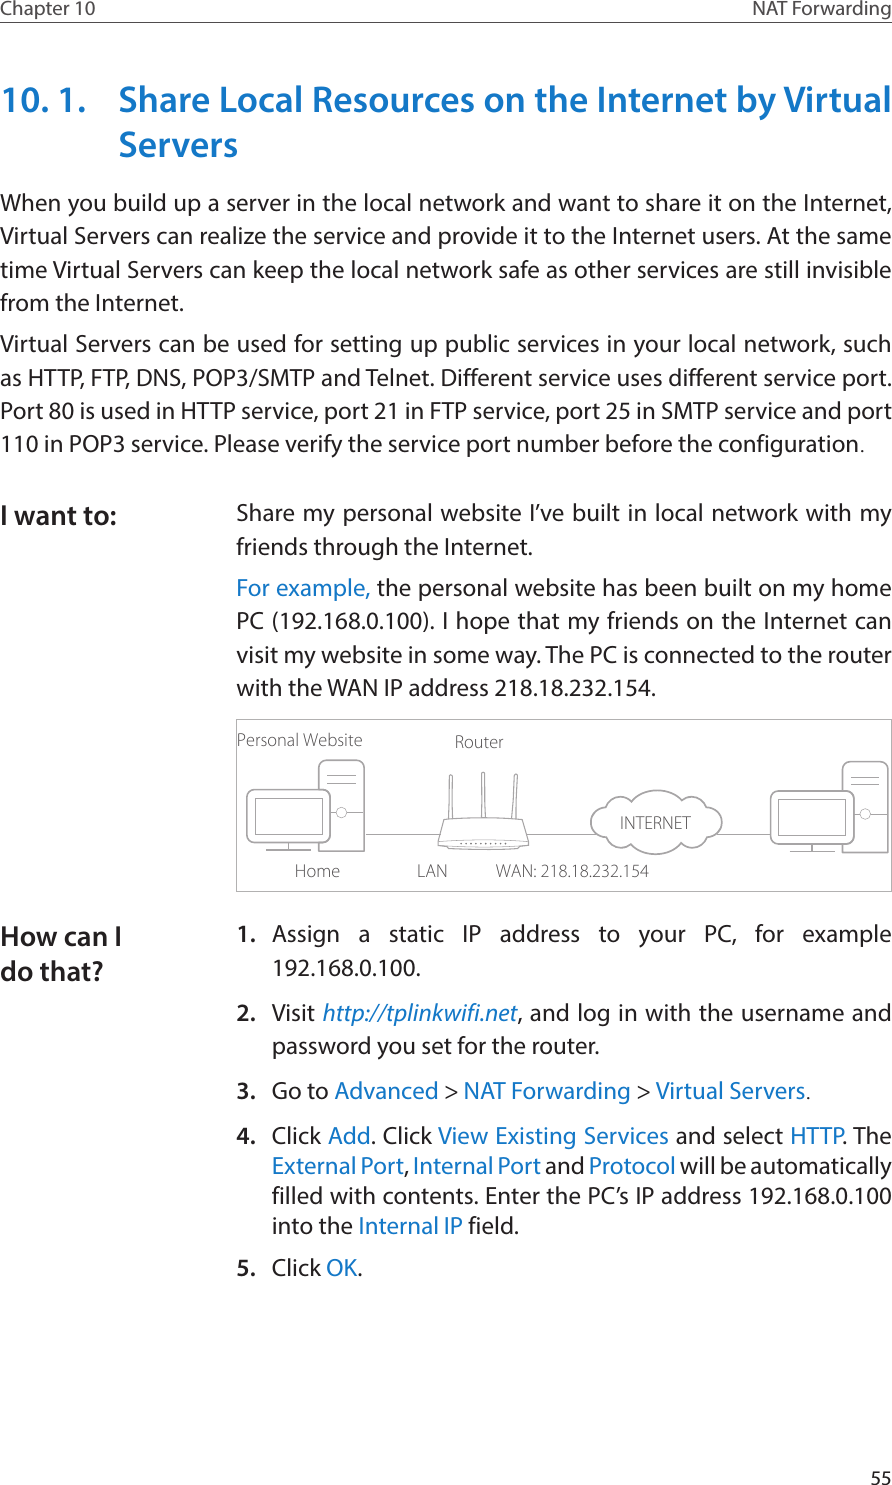 55Chapter 10 NAT Forwarding10. 1.  Share Local Resources on the Internet by Virtual ServersWhen you build up a server in the local network and want to share it on the Internet, Virtual Servers can realize the service and provide it to the Internet users. At the same time Virtual Servers can keep the local network safe as other services are still invisible from the Internet.Virtual Servers can be used for setting up public services in your local network, such as HTTP, FTP, DNS, POP3/SMTP and Telnet. Different service uses different service port. Port 80 is used in HTTP service, port 21 in FTP service, port 25 in SMTP service and port 110 in POP3 service. Please verify the service port number before the configuration.Share my personal website I’ve built in local network with my friends through the Internet.For example, the personal website has been built on my home PC (192.168.0.100). I hope that my friends on the Internet can visit my website in some way. The PC is connected to the router with the WAN IP address 218.18.232.154.Personal WebsiteHomeRouterWAN: 218.18.232.154LAN1.  Assign a static IP address to your PC, for example 192.168.0.100.2.  Visit http://tplinkwifi.net, and log in with the username and password you set for the router.3.  Go to Advanced &gt; NAT Forwarding &gt; Virtual Servers.4.  Click Add. Click View Existing Services and select HTTP. The External Port, Internal Port and Protocol will be automatically filled with contents. Enter the PC’s IP address 192.168.0.100 into the Internal IP field.5.  Click OK.I want to:How can I do that?INTERNET